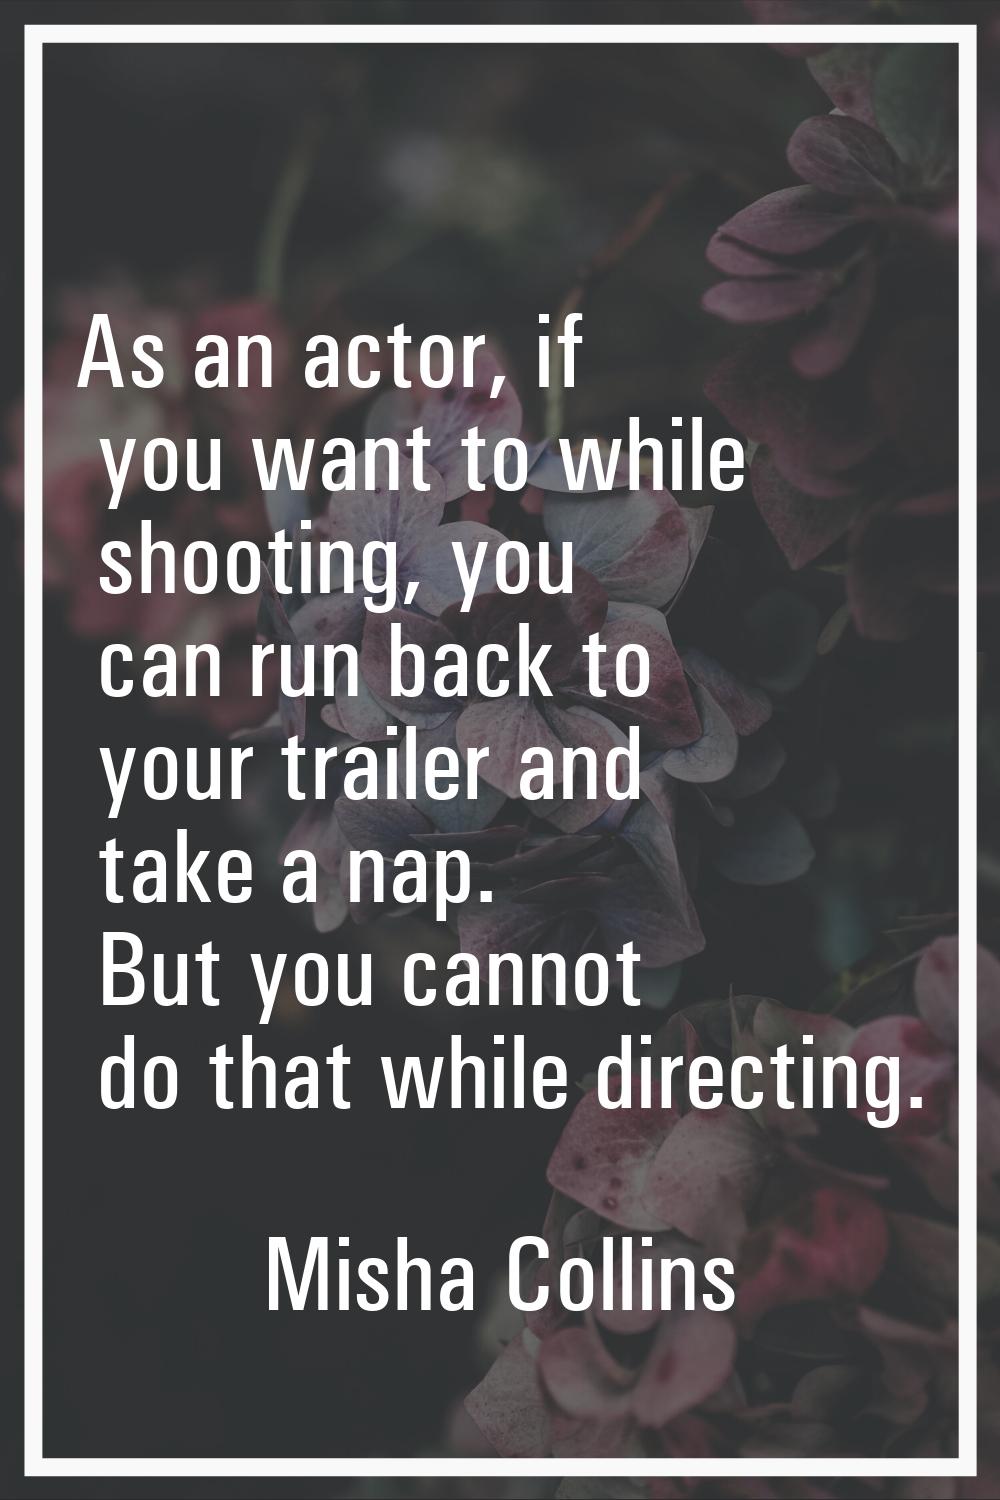 As an actor, if you want to while shooting, you can run back to your trailer and take a nap. But yo